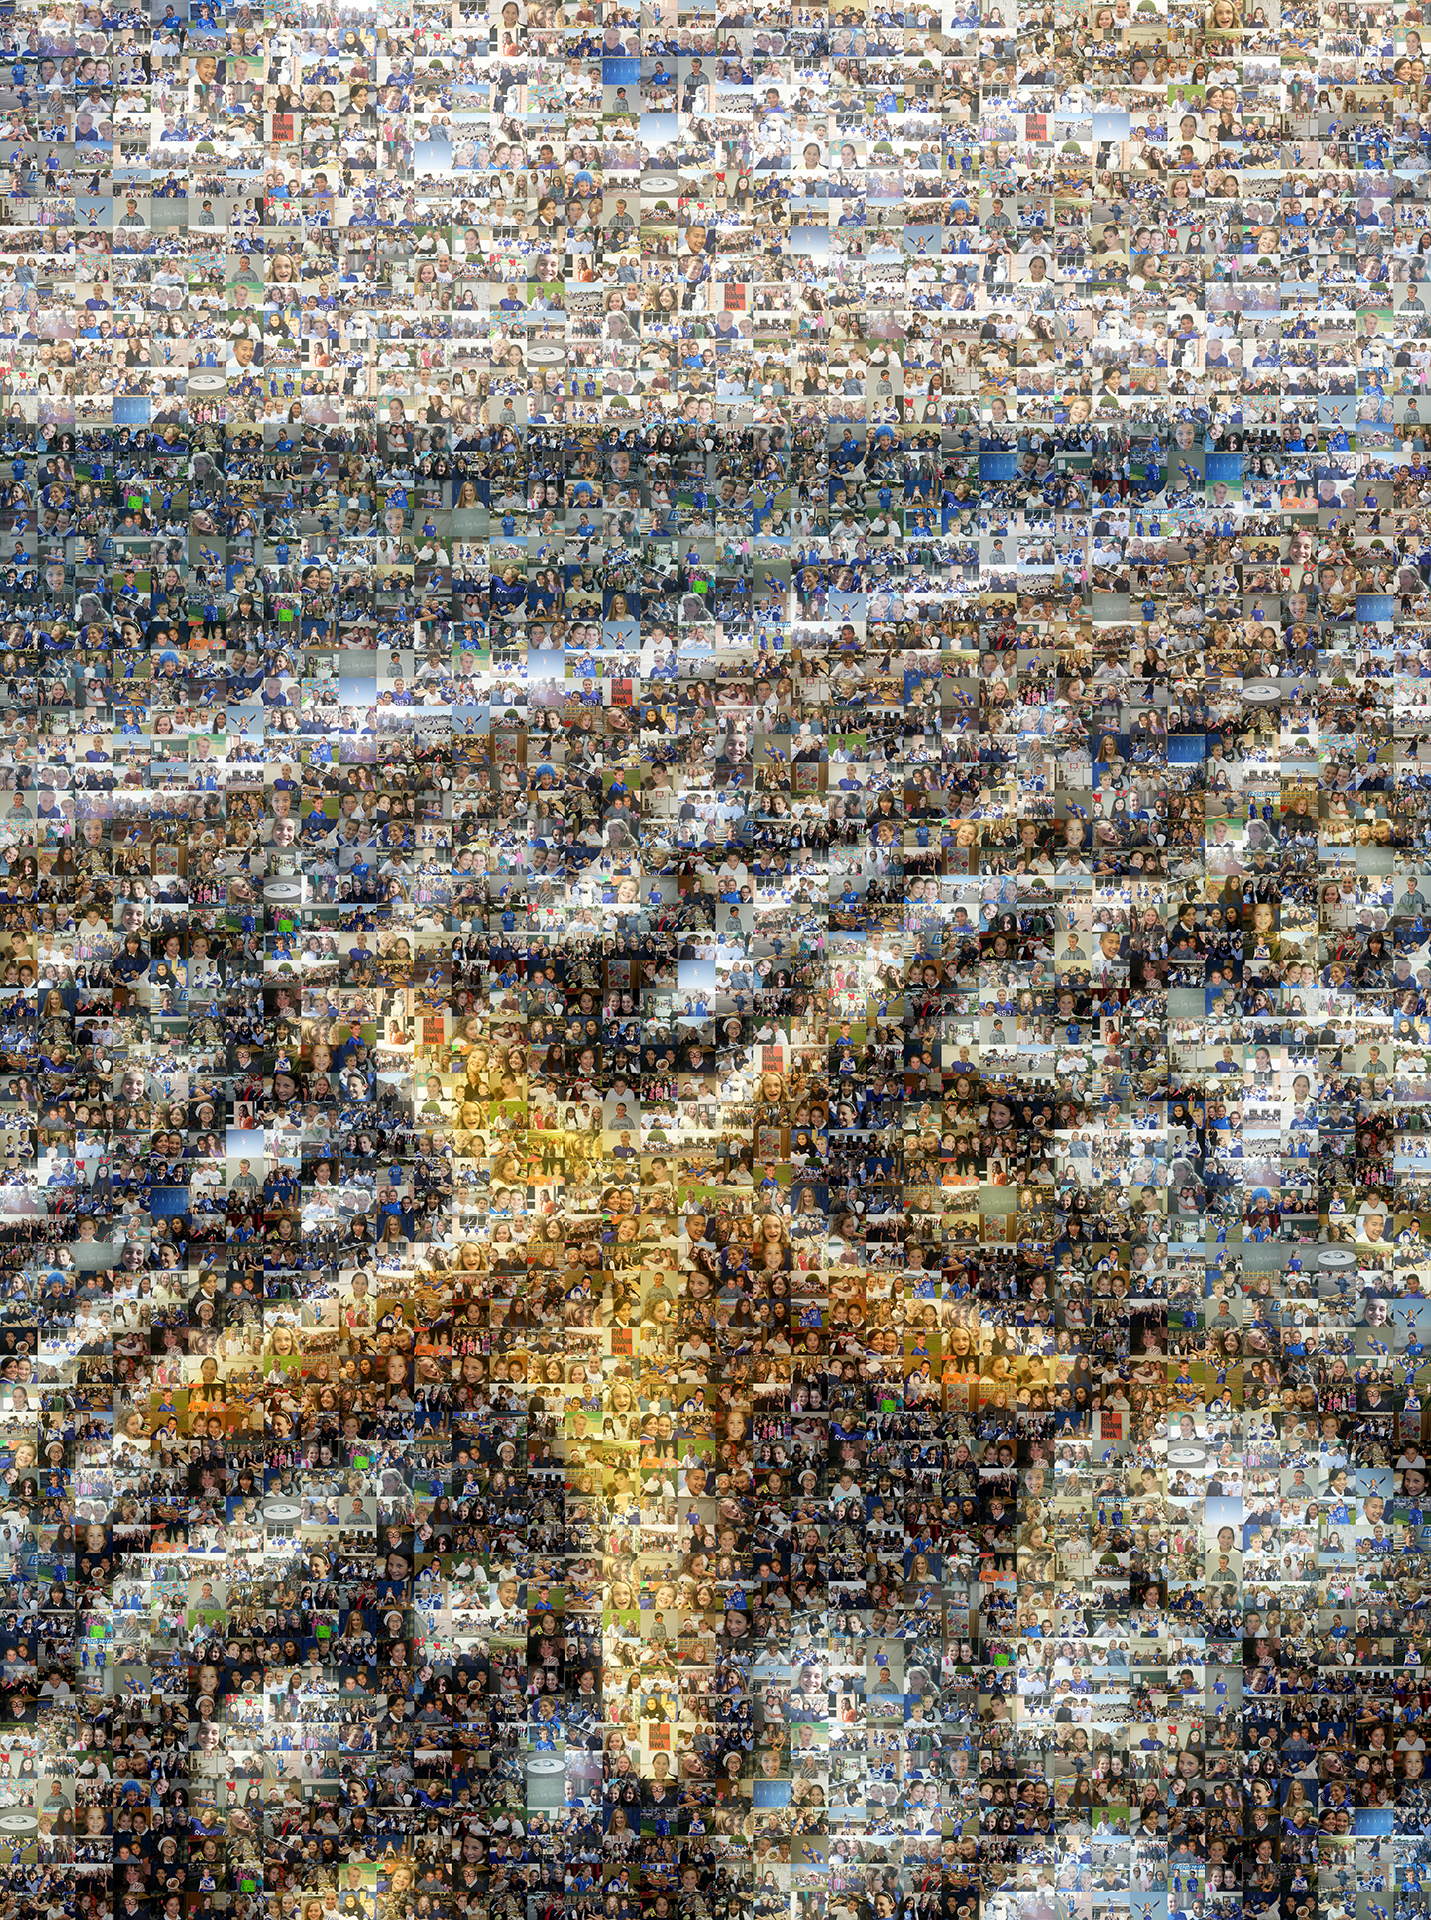 photo mosaic created using 269 photos taken over the school year